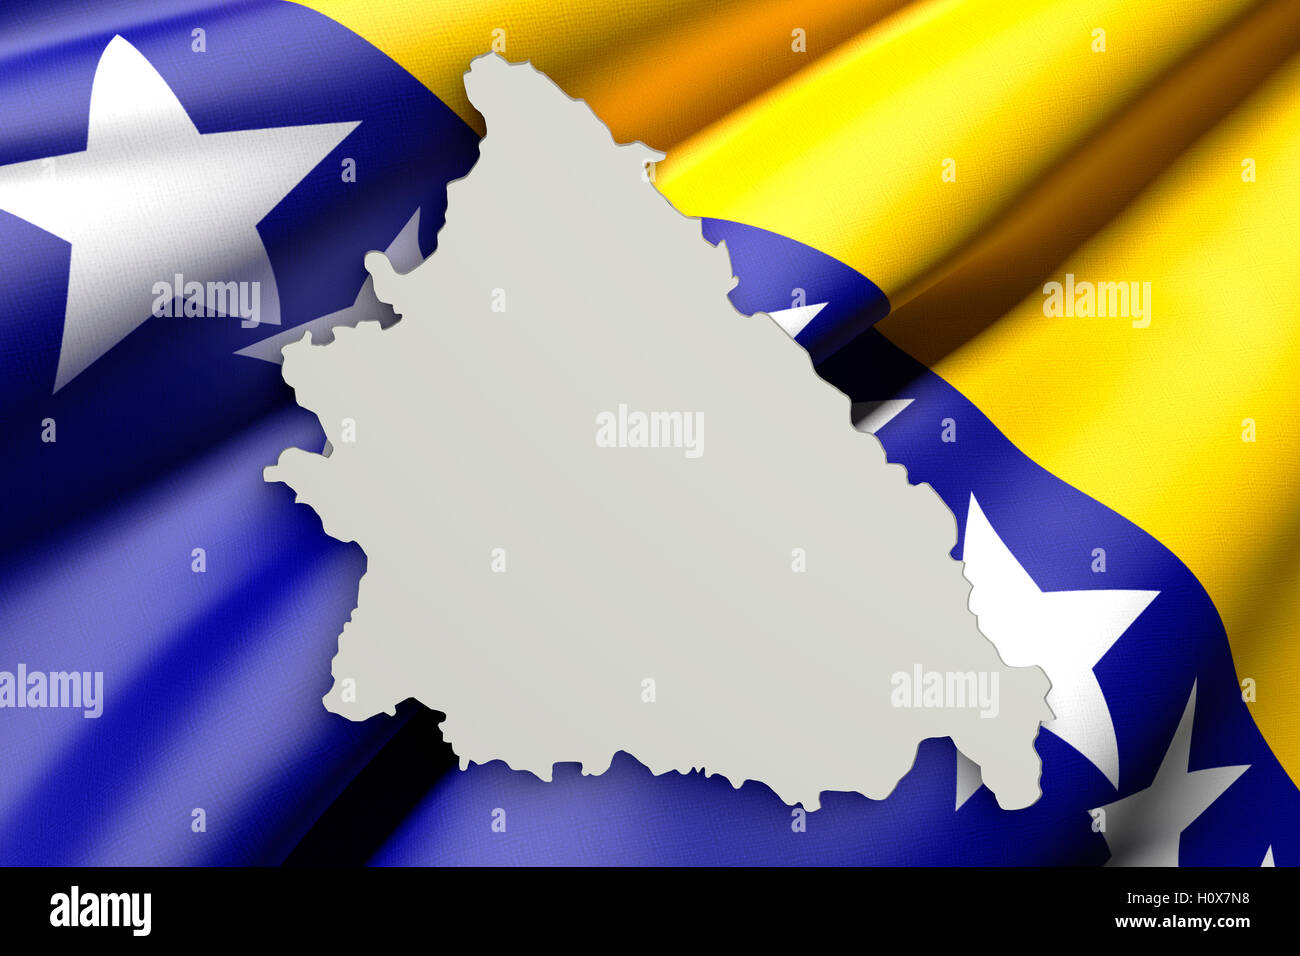 3d rendering of Bosnia Herzegovina map and flag on background. Stock Photo